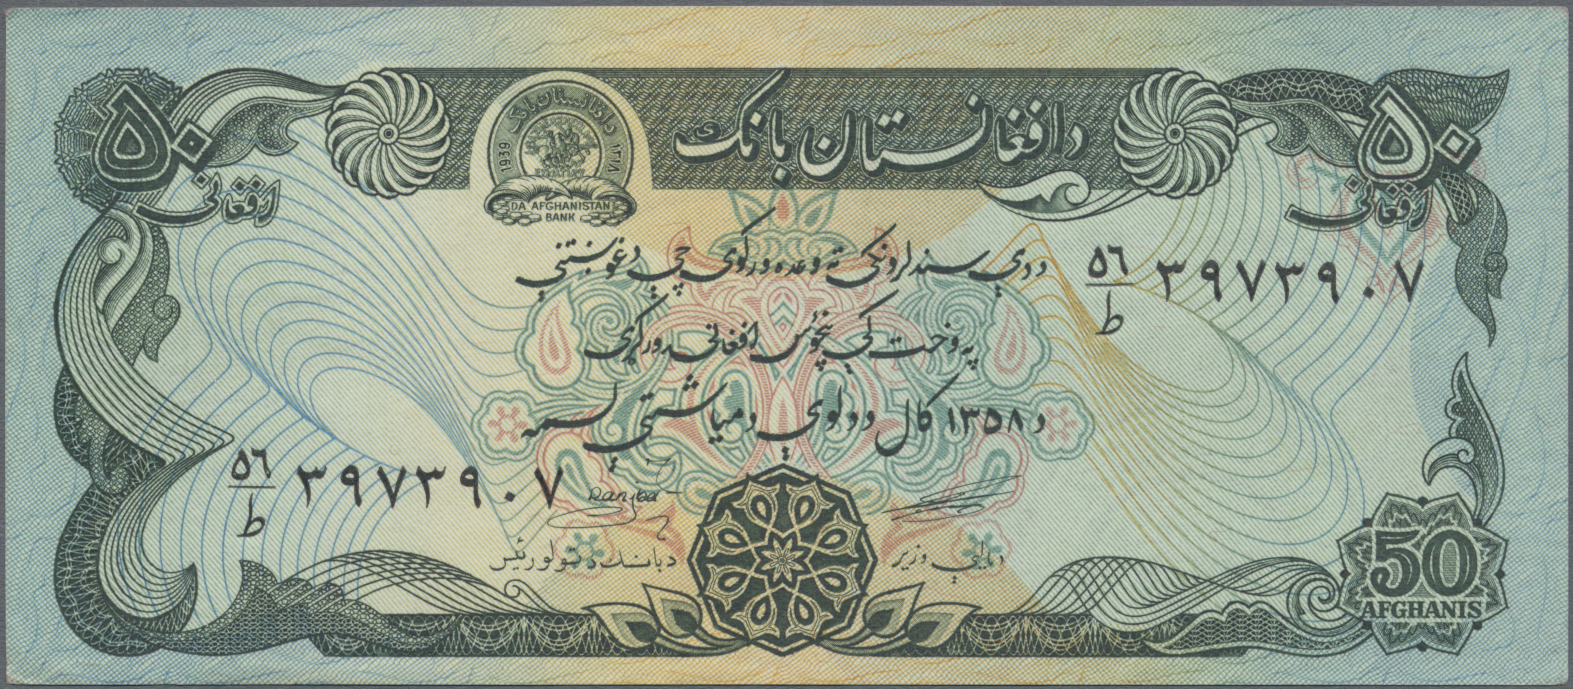 Lot 502 - Afghanistan | Banknoten  -  Auktionshaus Christoph Gärtner GmbH & Co. KG 52nd Auction - Day 1